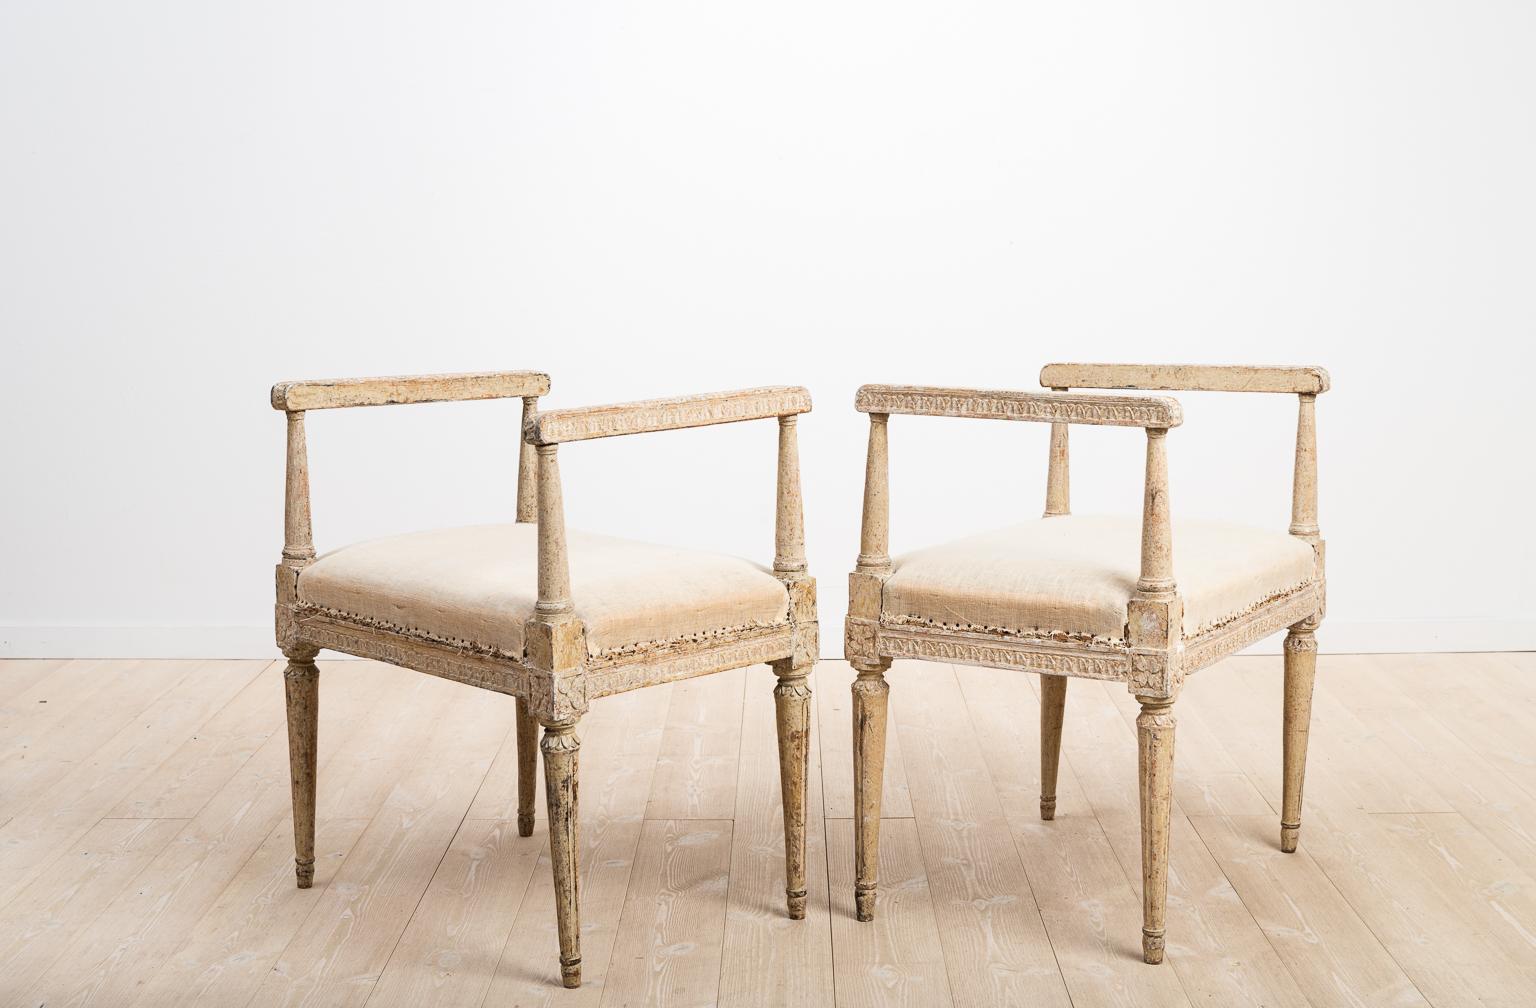 A set of two Gustavian banquettes from Sweden. Richly decorated with Gustavian styled wooden carvings. The surface has been dry scarped to the first layer of paint, which also is from the 1700s. The banquettes are signed at the bottom with the